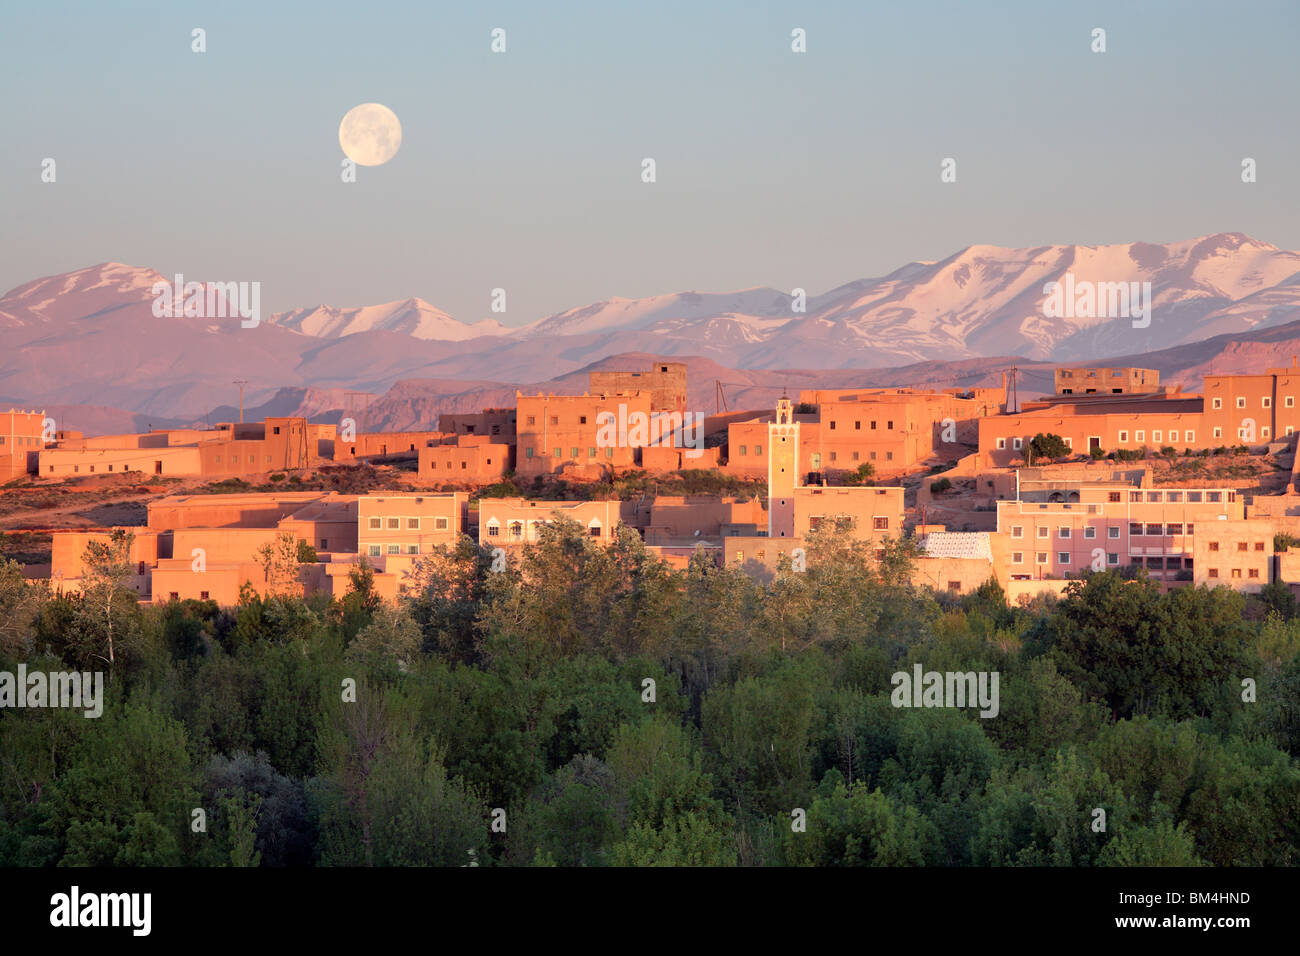 The full moon sets over the Atlas Mountains behind Boumalne du Dades in the Dades Valley of Morocco Stock Photo